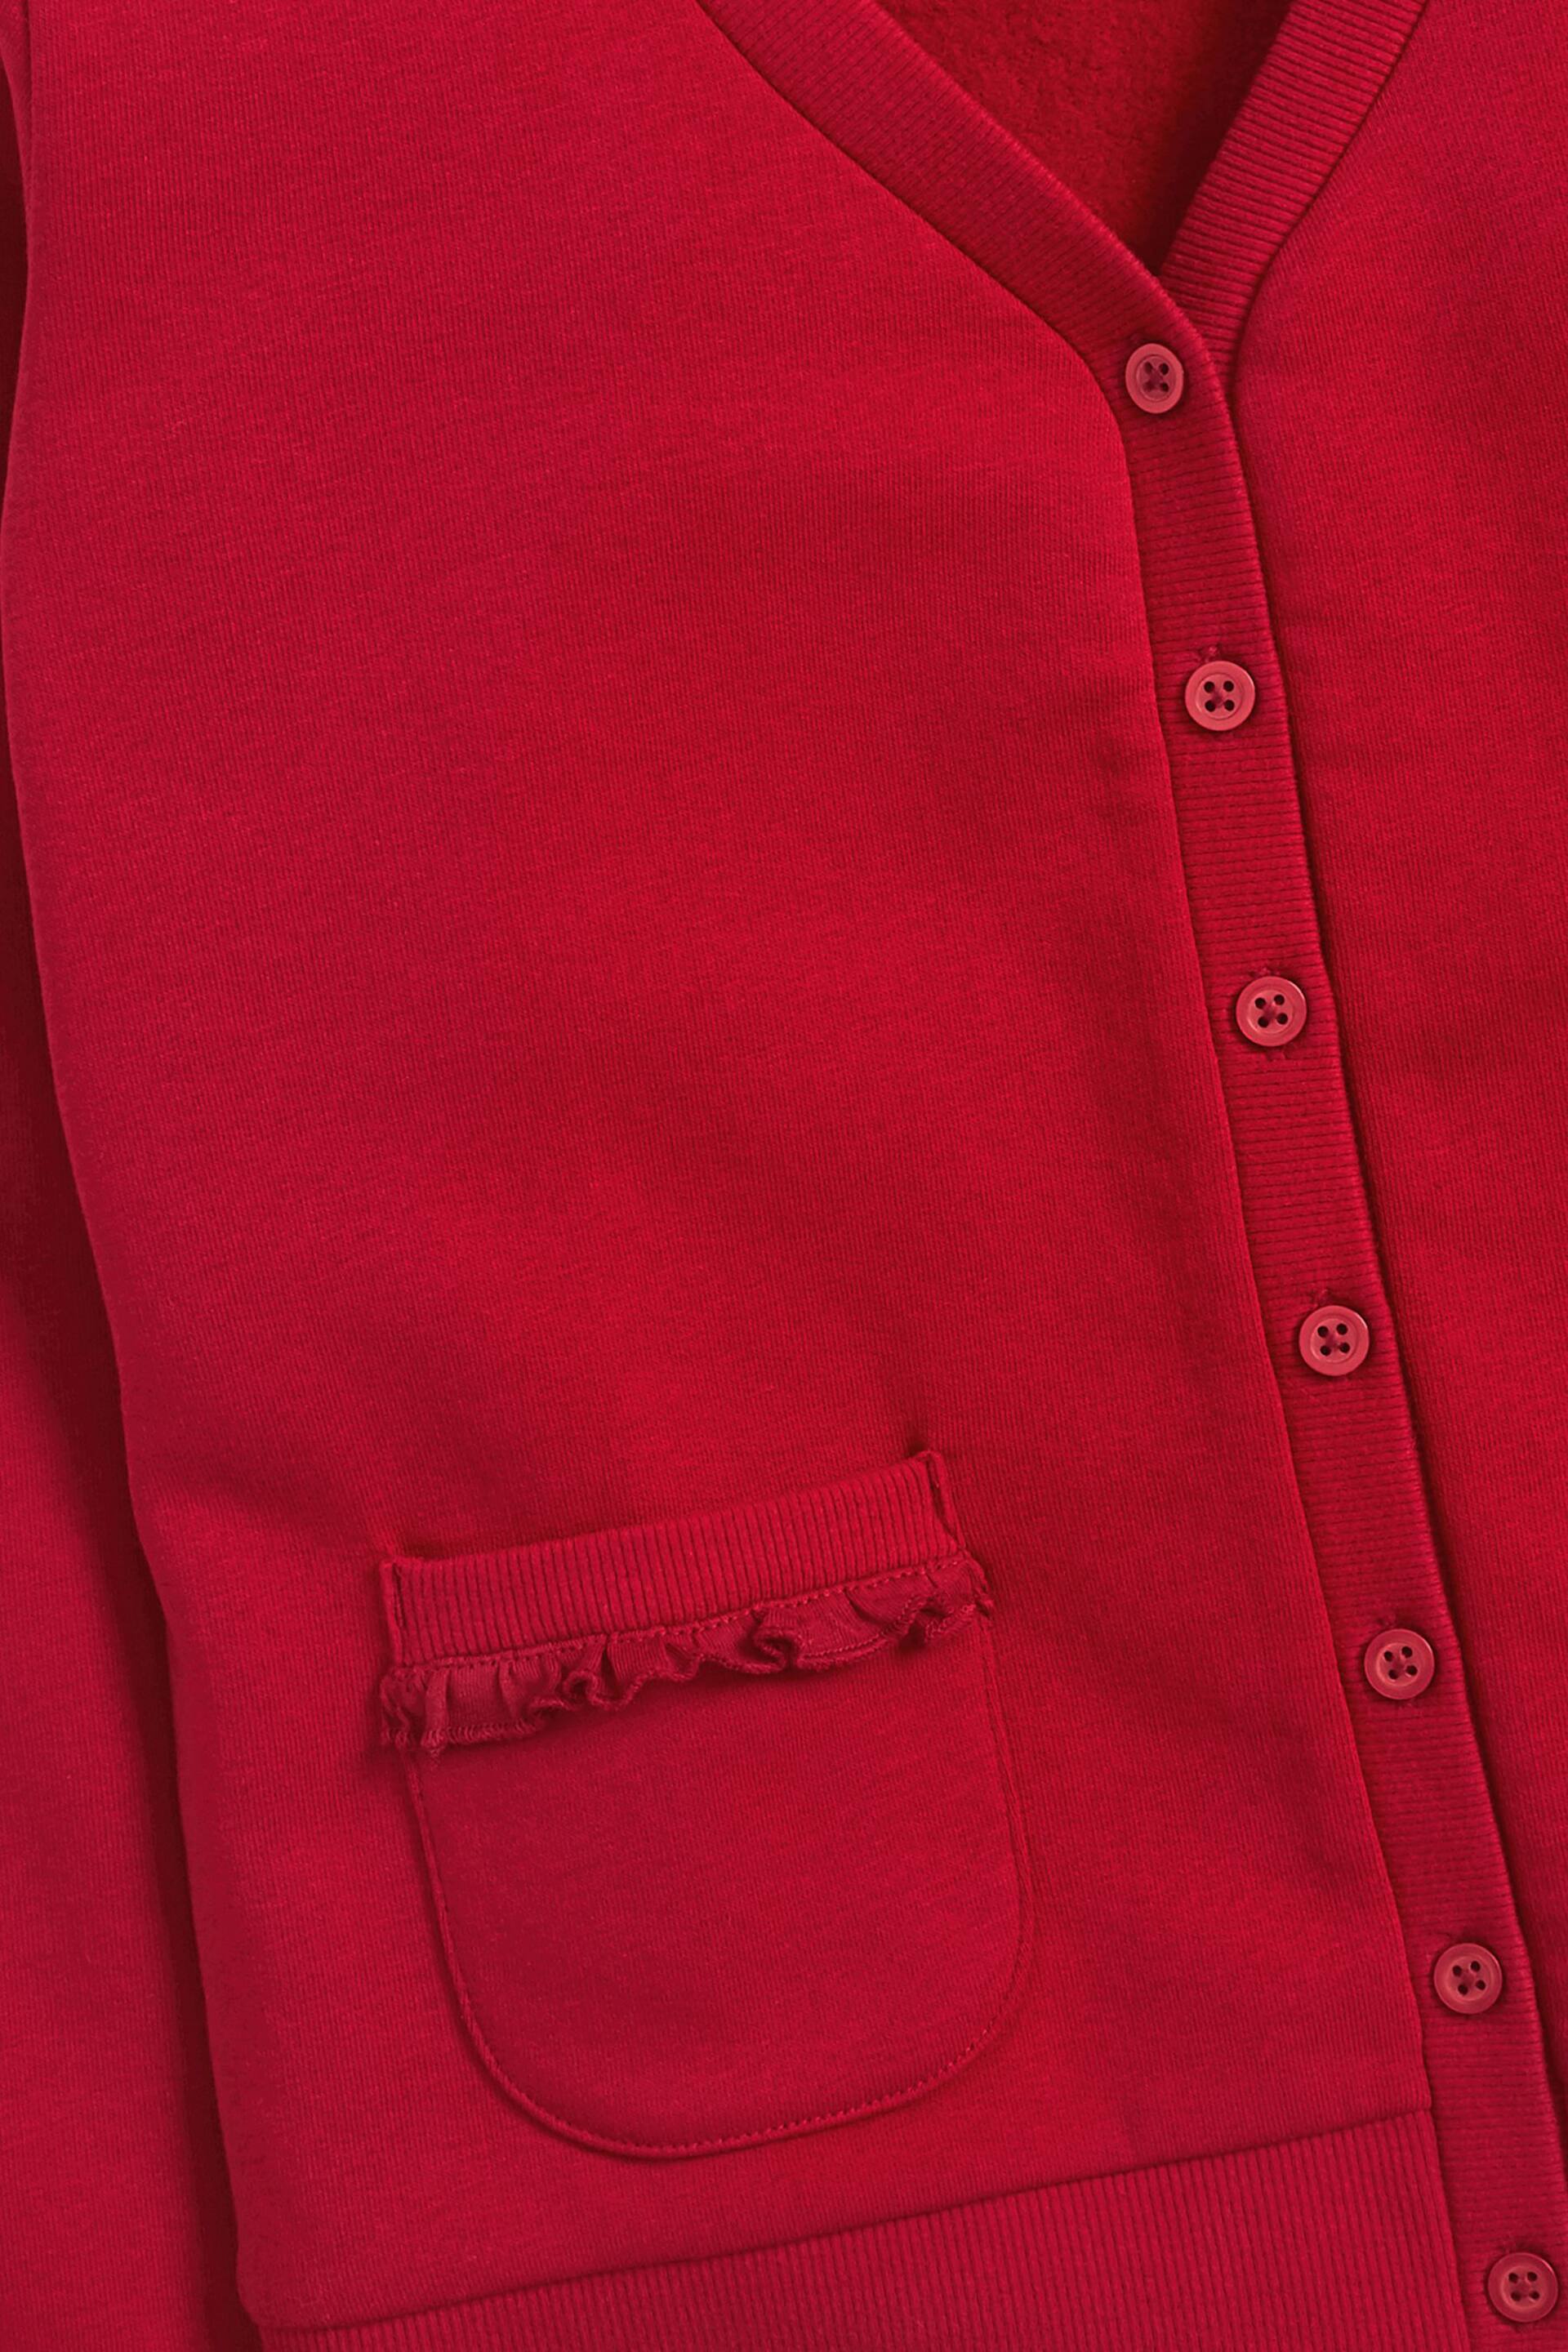 Red Cotton Rich Frill Pocket Jersey School Cardigan (3-16yrs) - Image 7 of 7